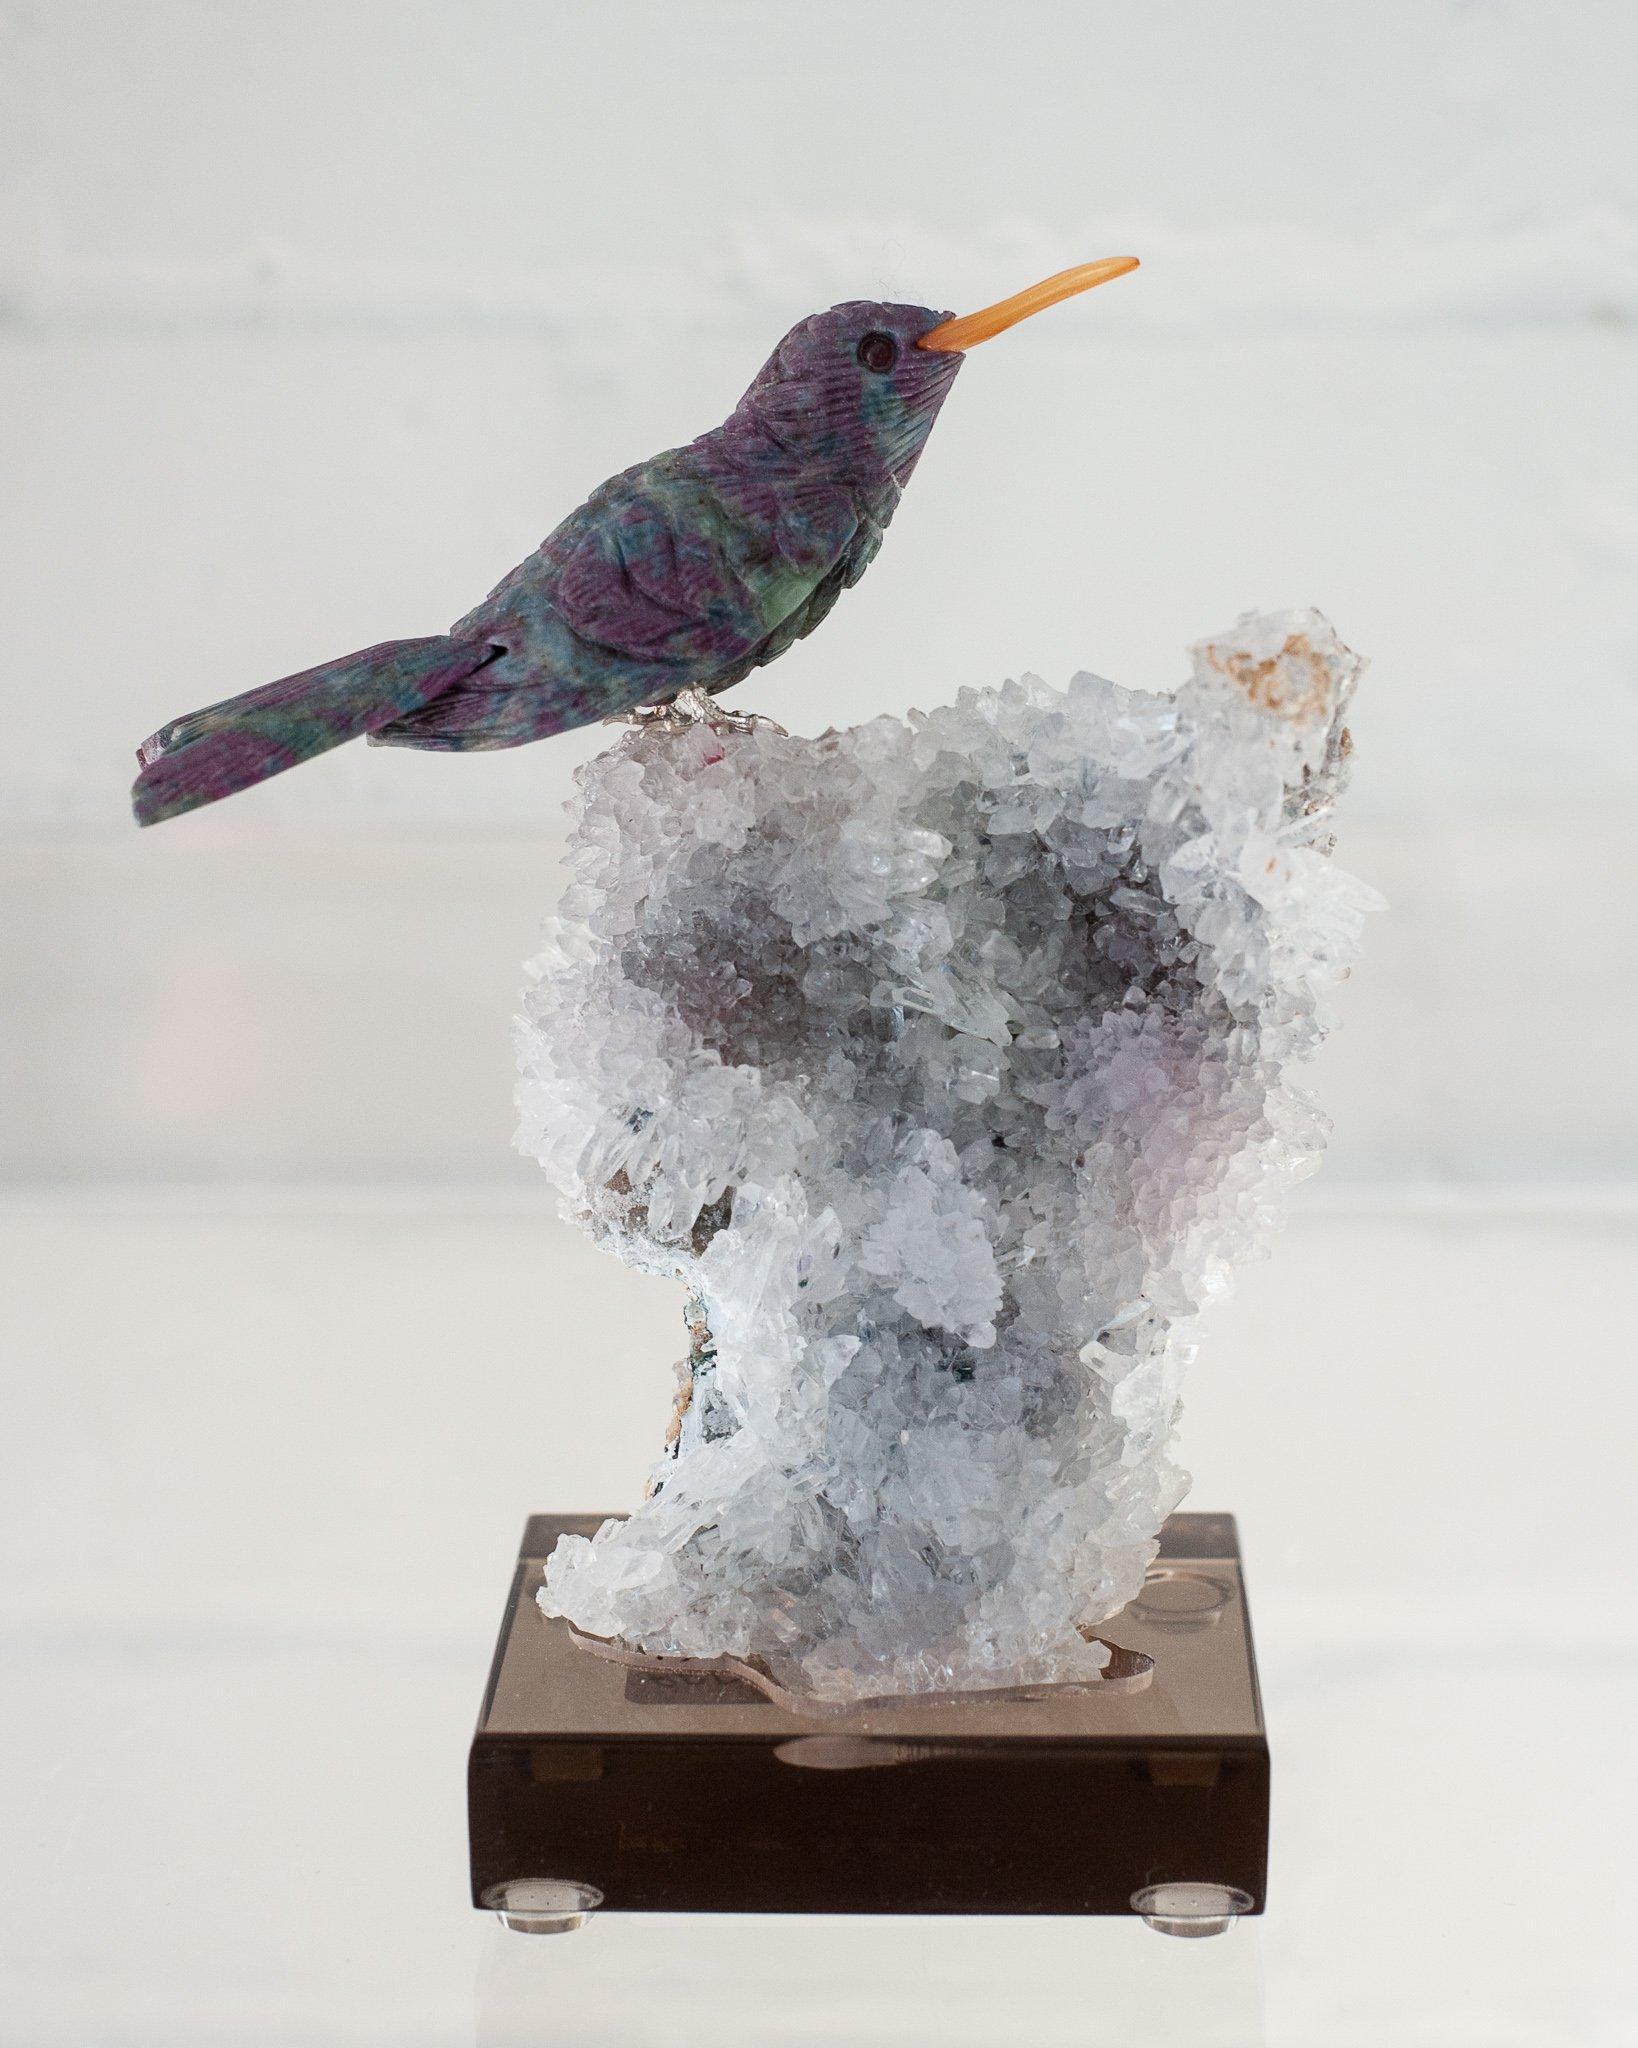 A beautiful hand carved semi precious ruby stone hummingbird mounted on an amethyst and quartz mineral specimen base. This exotic bird is a decorative combination of ornithology and geology.